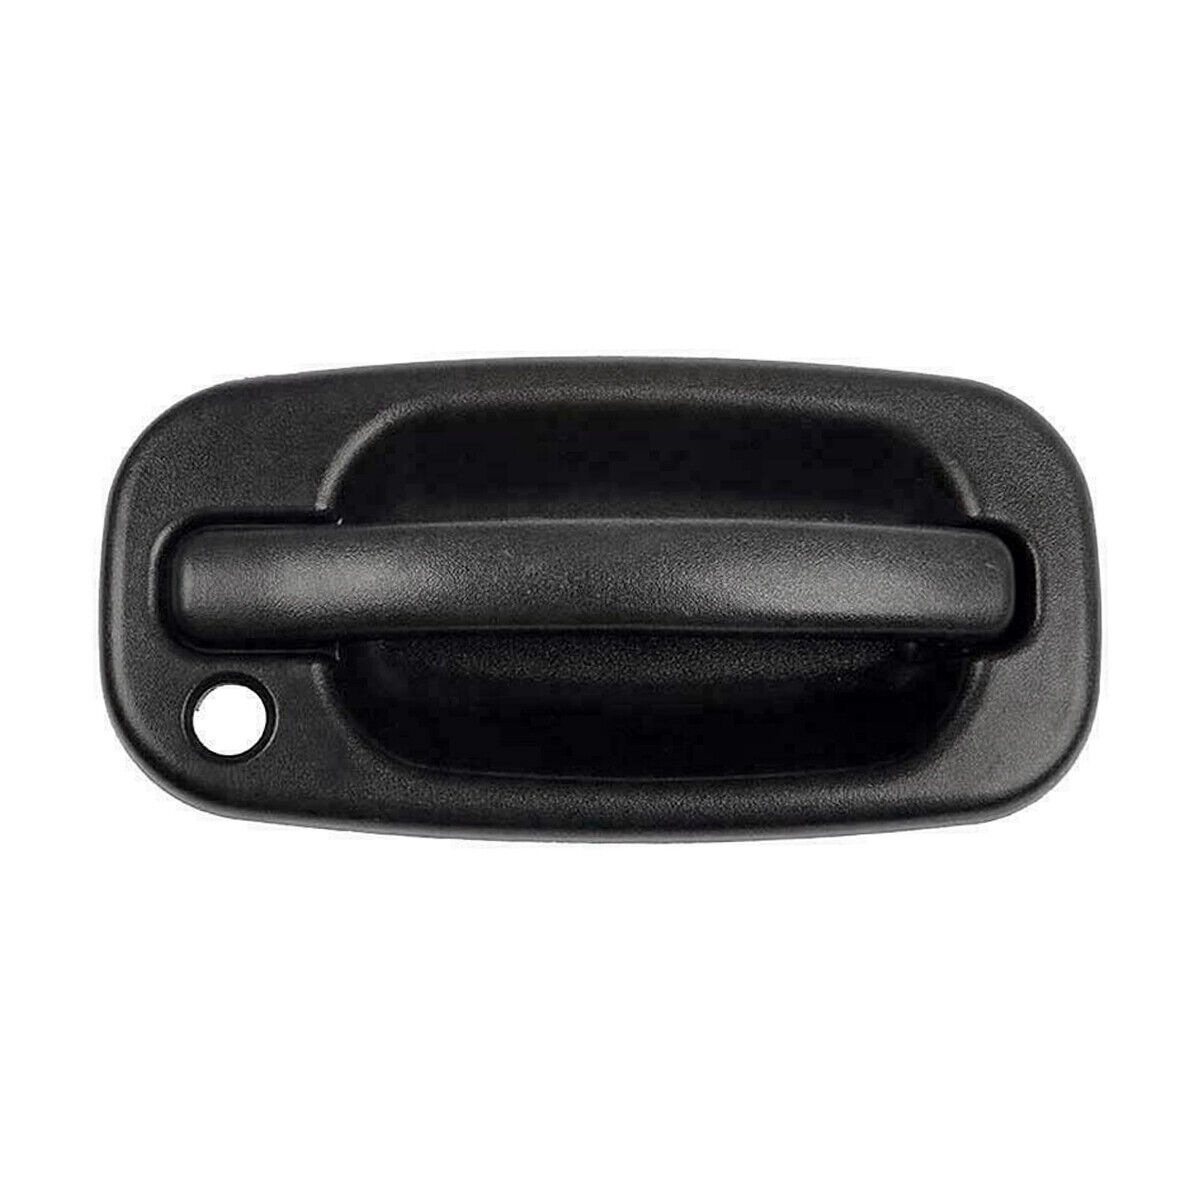 New Front Passenger Side Outer Door Handle For 99-07 Silverado Sierra GM1311129